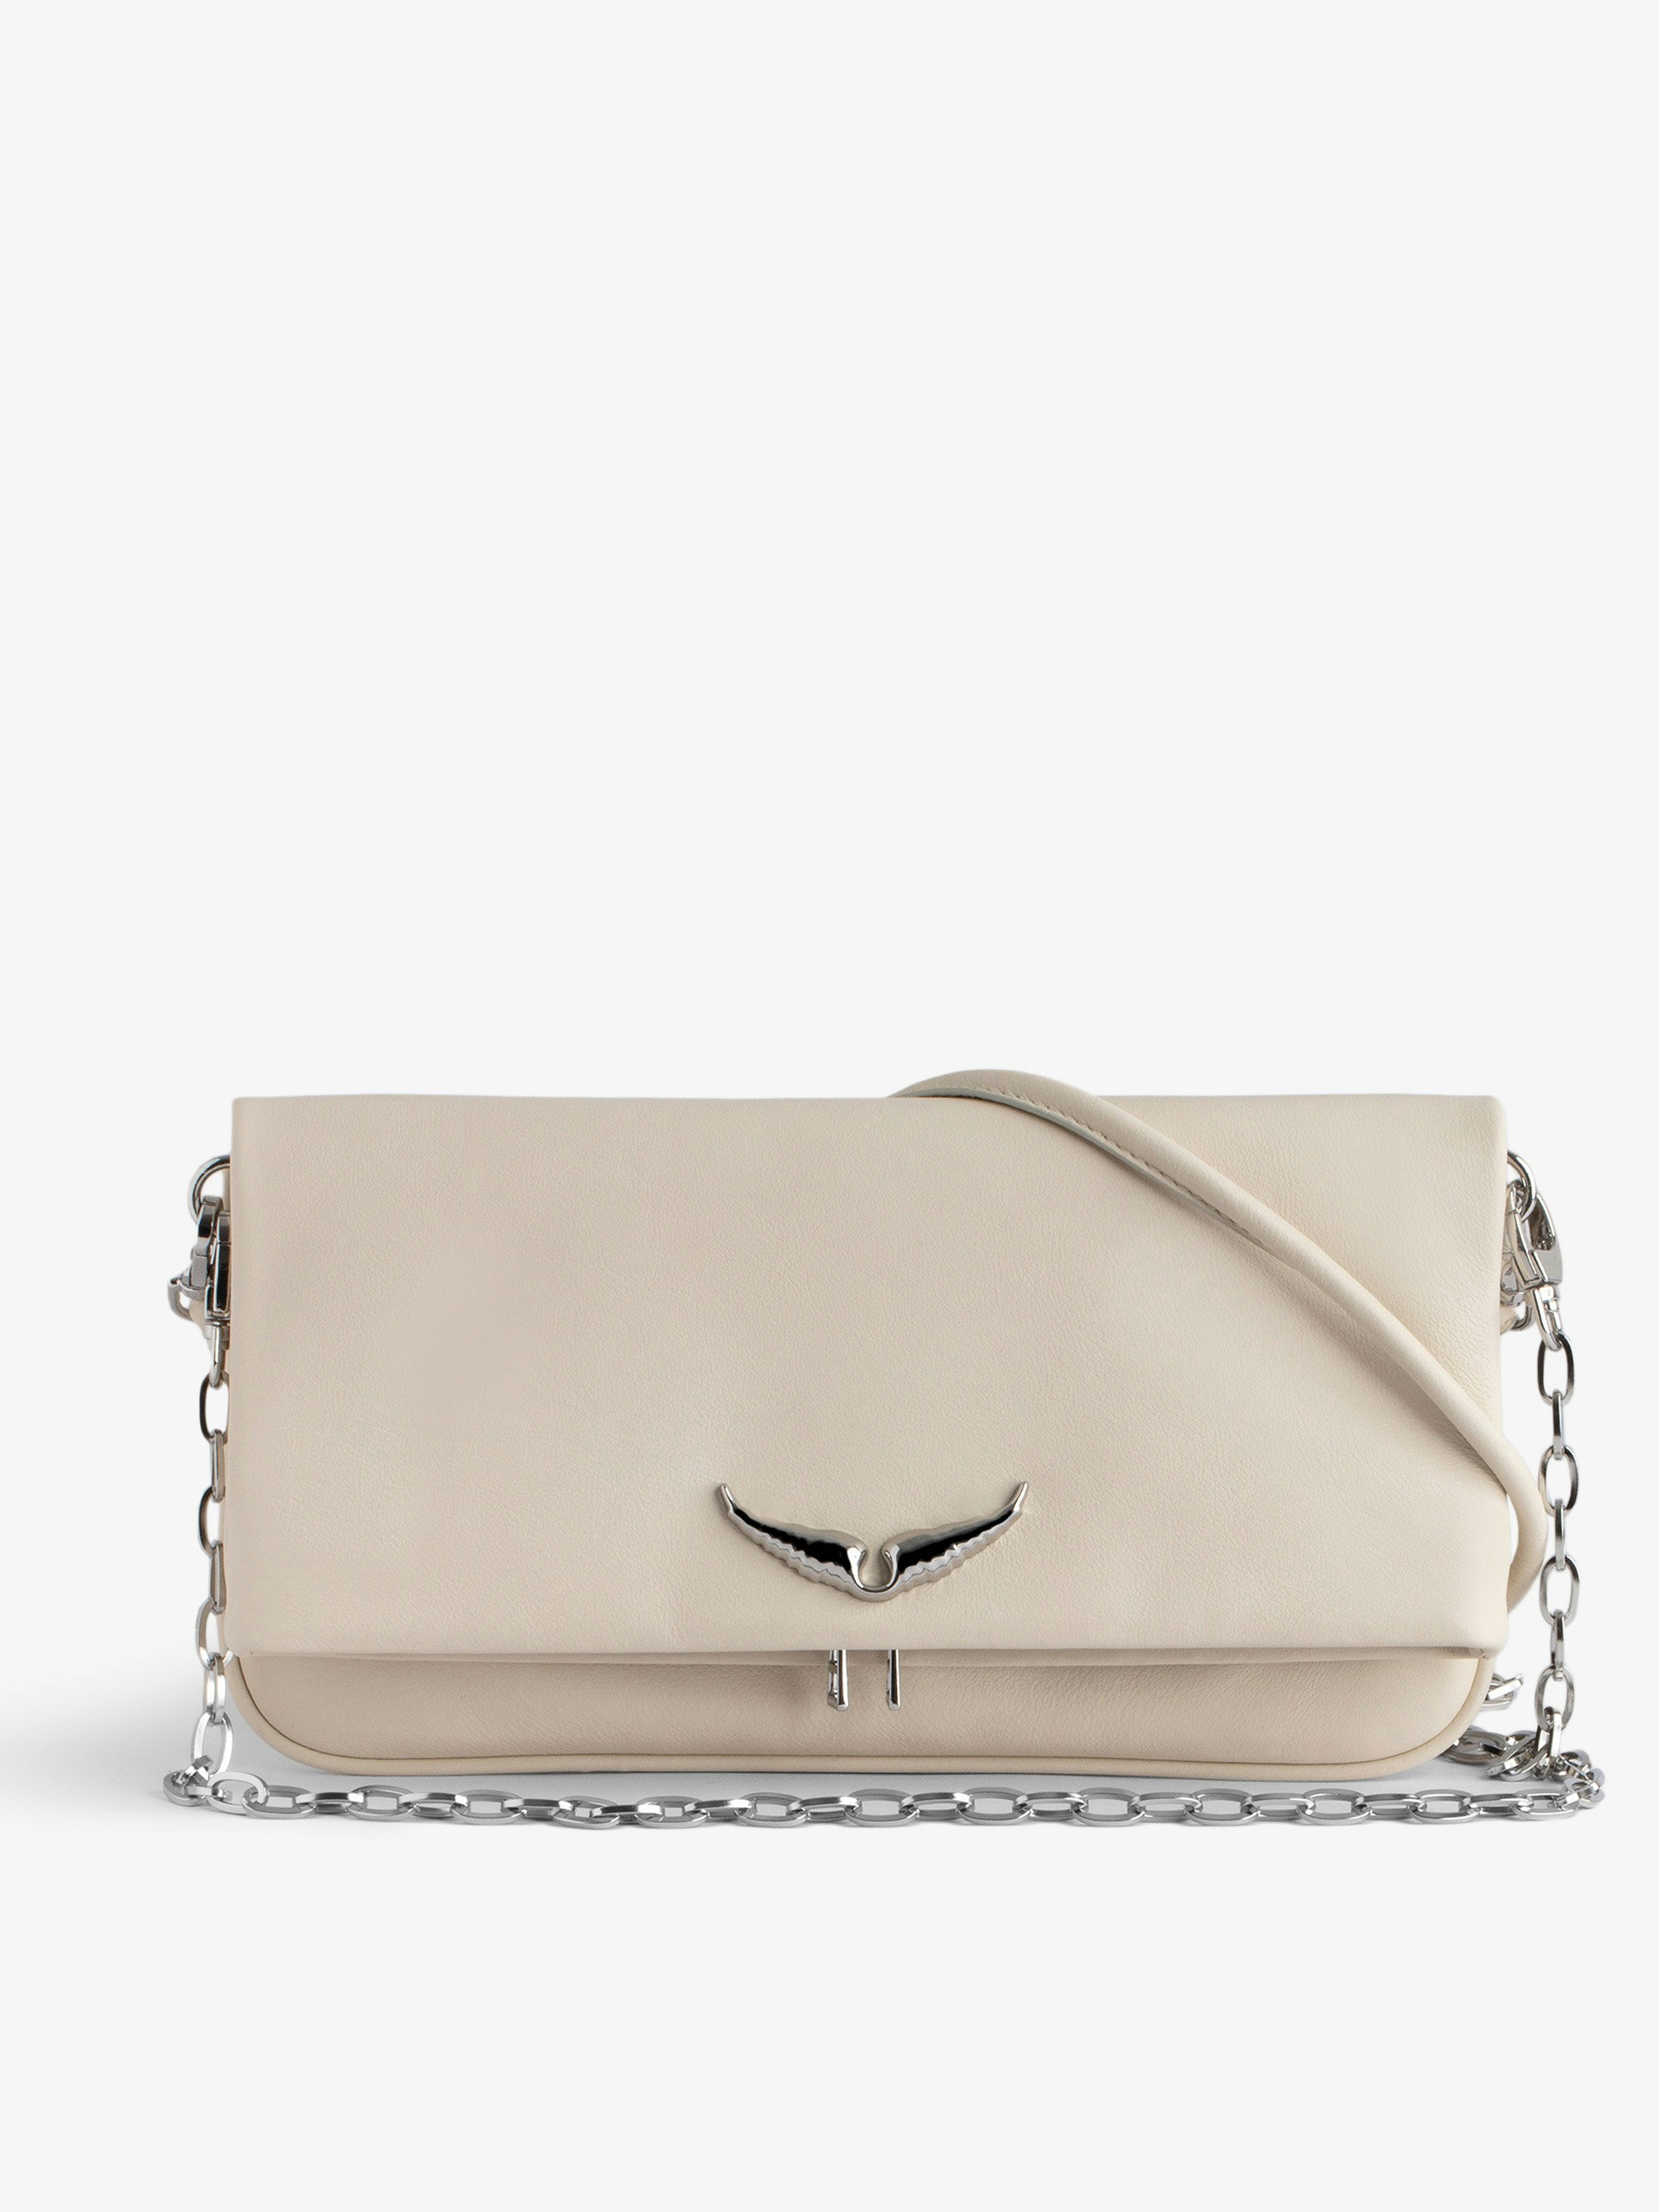 Rock Eternal Clutch - Women’s white smooth leather clutch with tied shoulder strap, chain and wings.